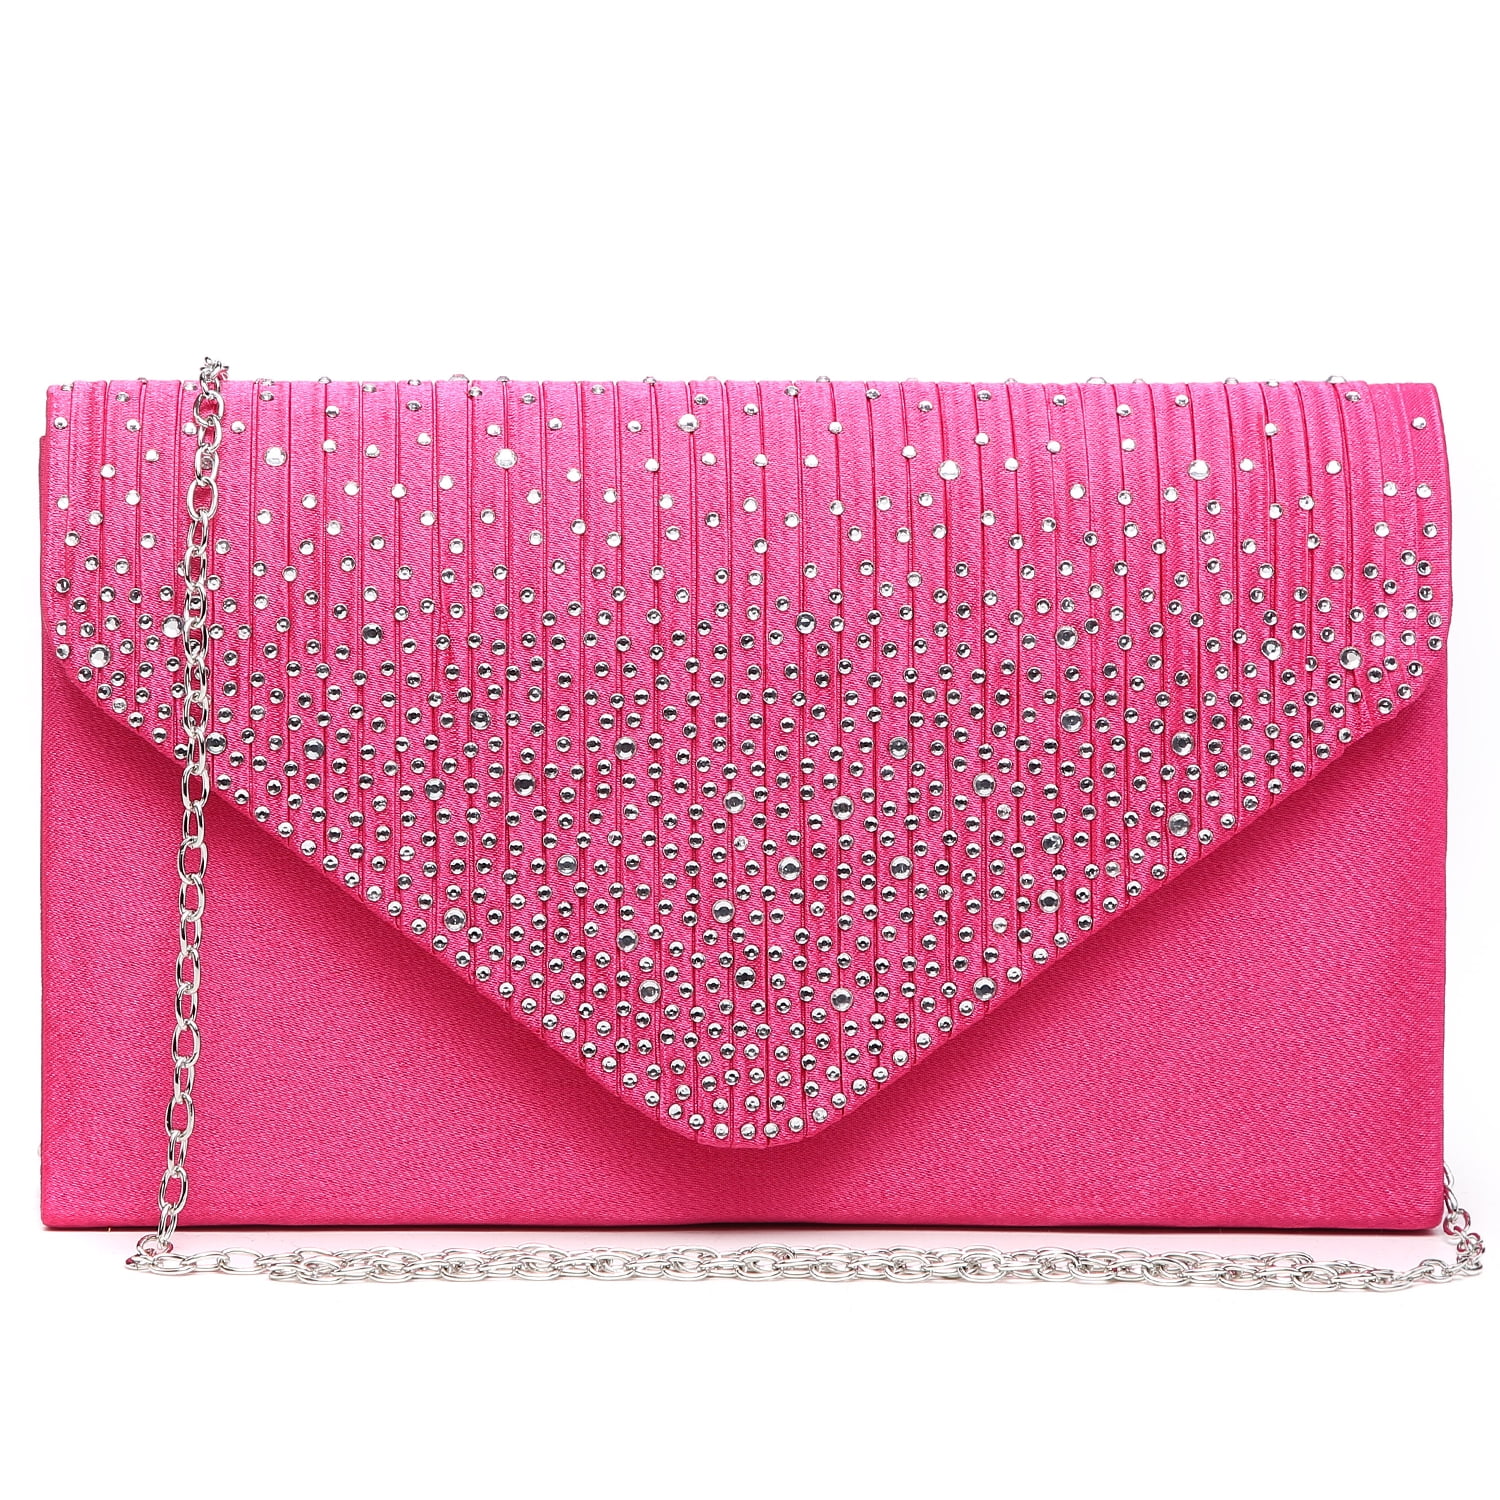 WOMENS DIAMANTE PARTY PROM BRIDAL PLEATED EVENING CLUTCH HAND BAG PURSE 